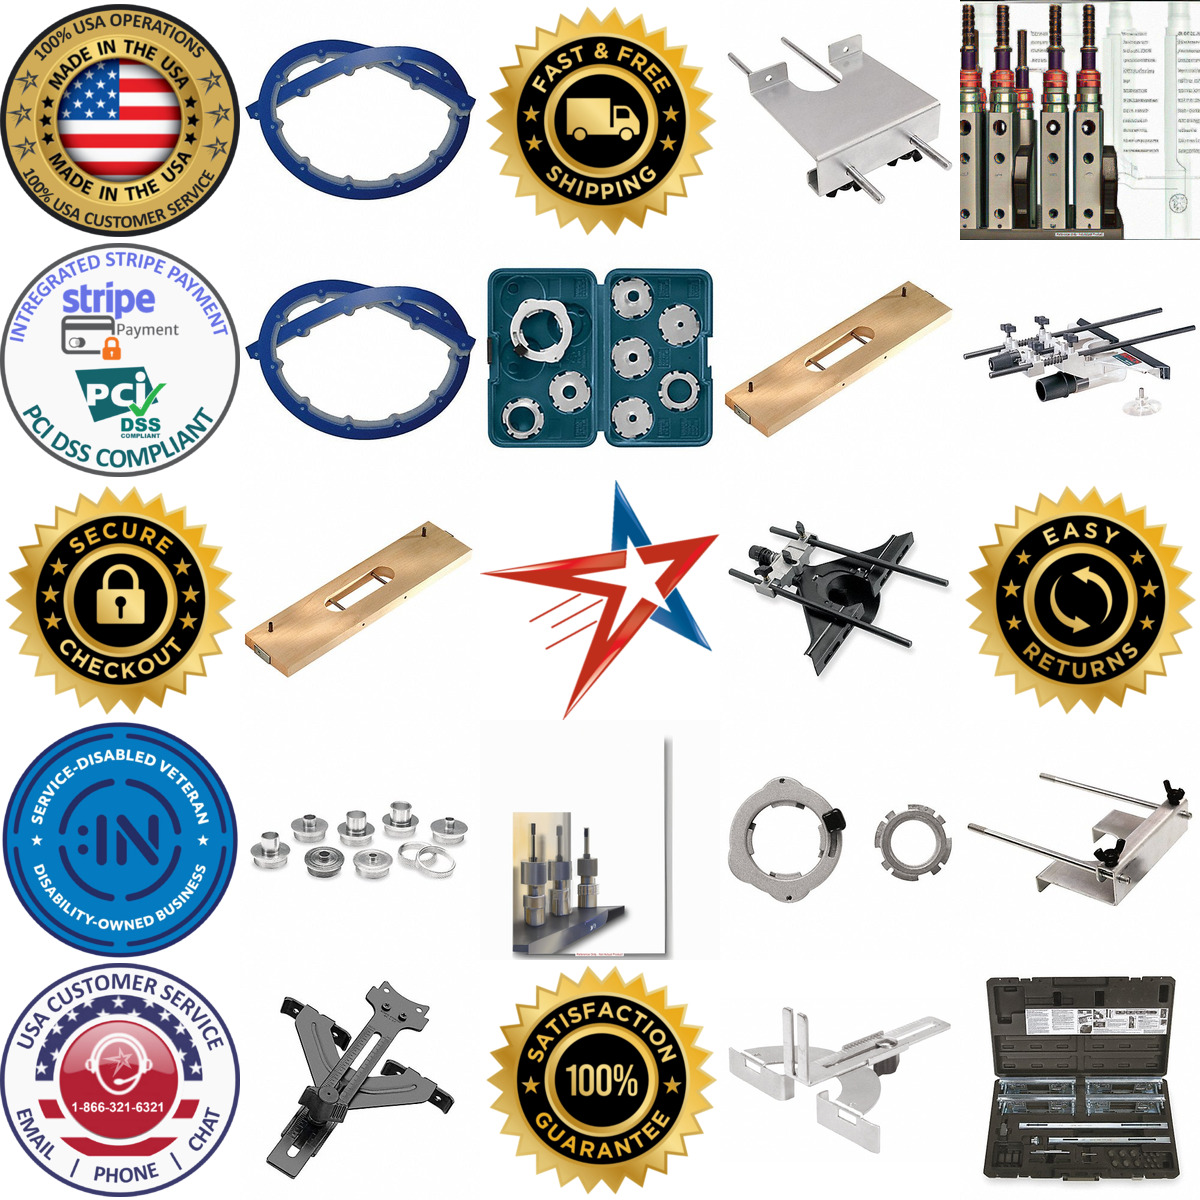 A selection of Router Guides products on GoVets